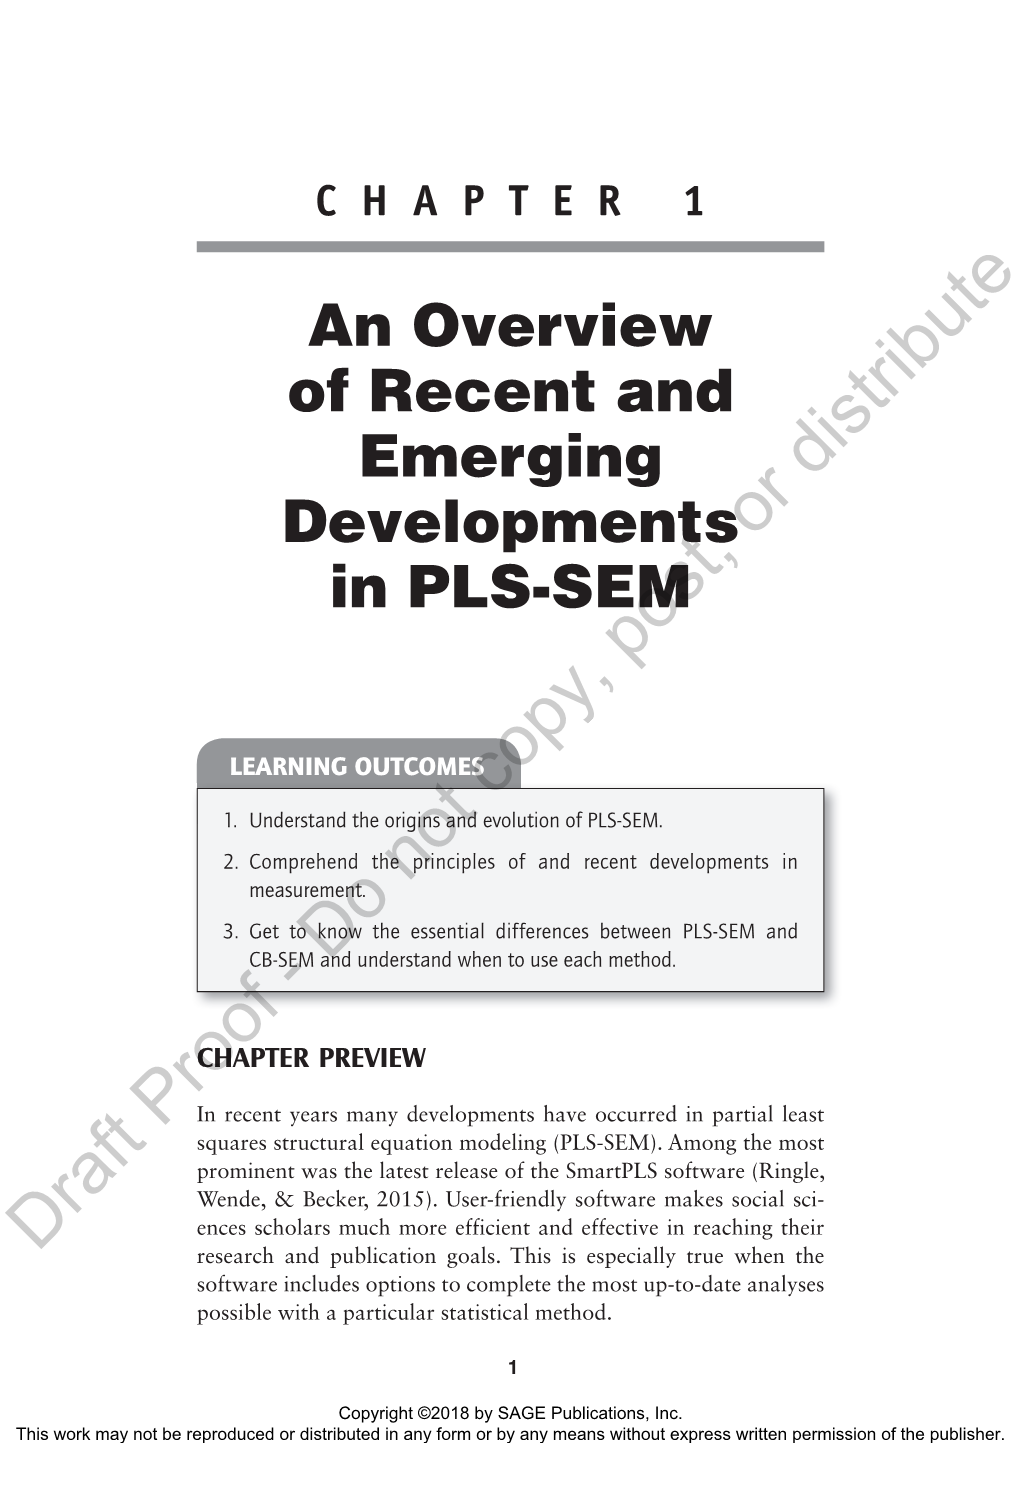 An Overview of Recent and Emerging Developments in PLS-SEM